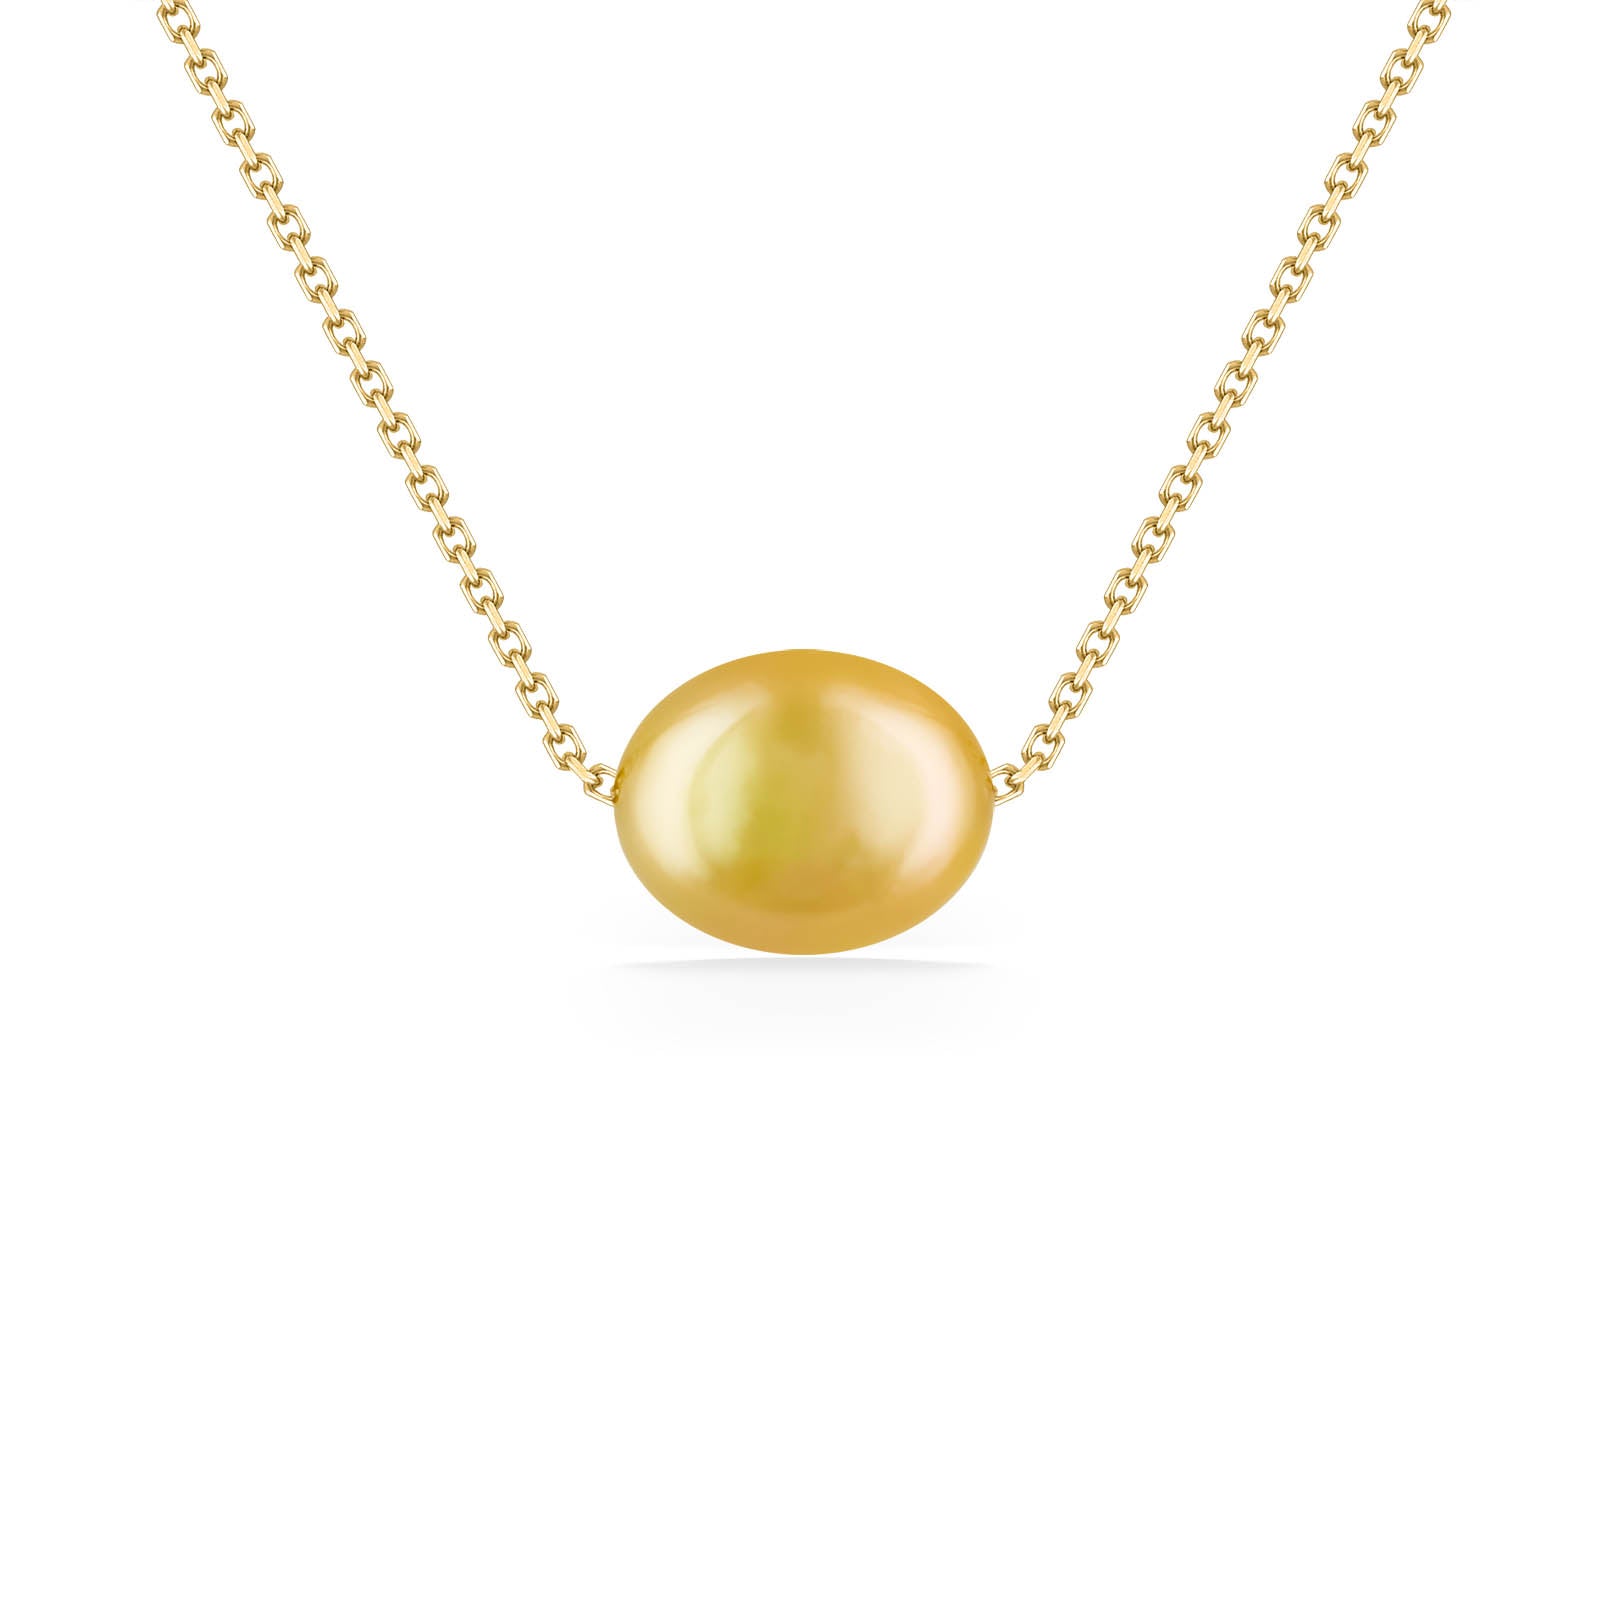 50540 - 14K Yellow Gold - Golden South Sea Pearl Slider